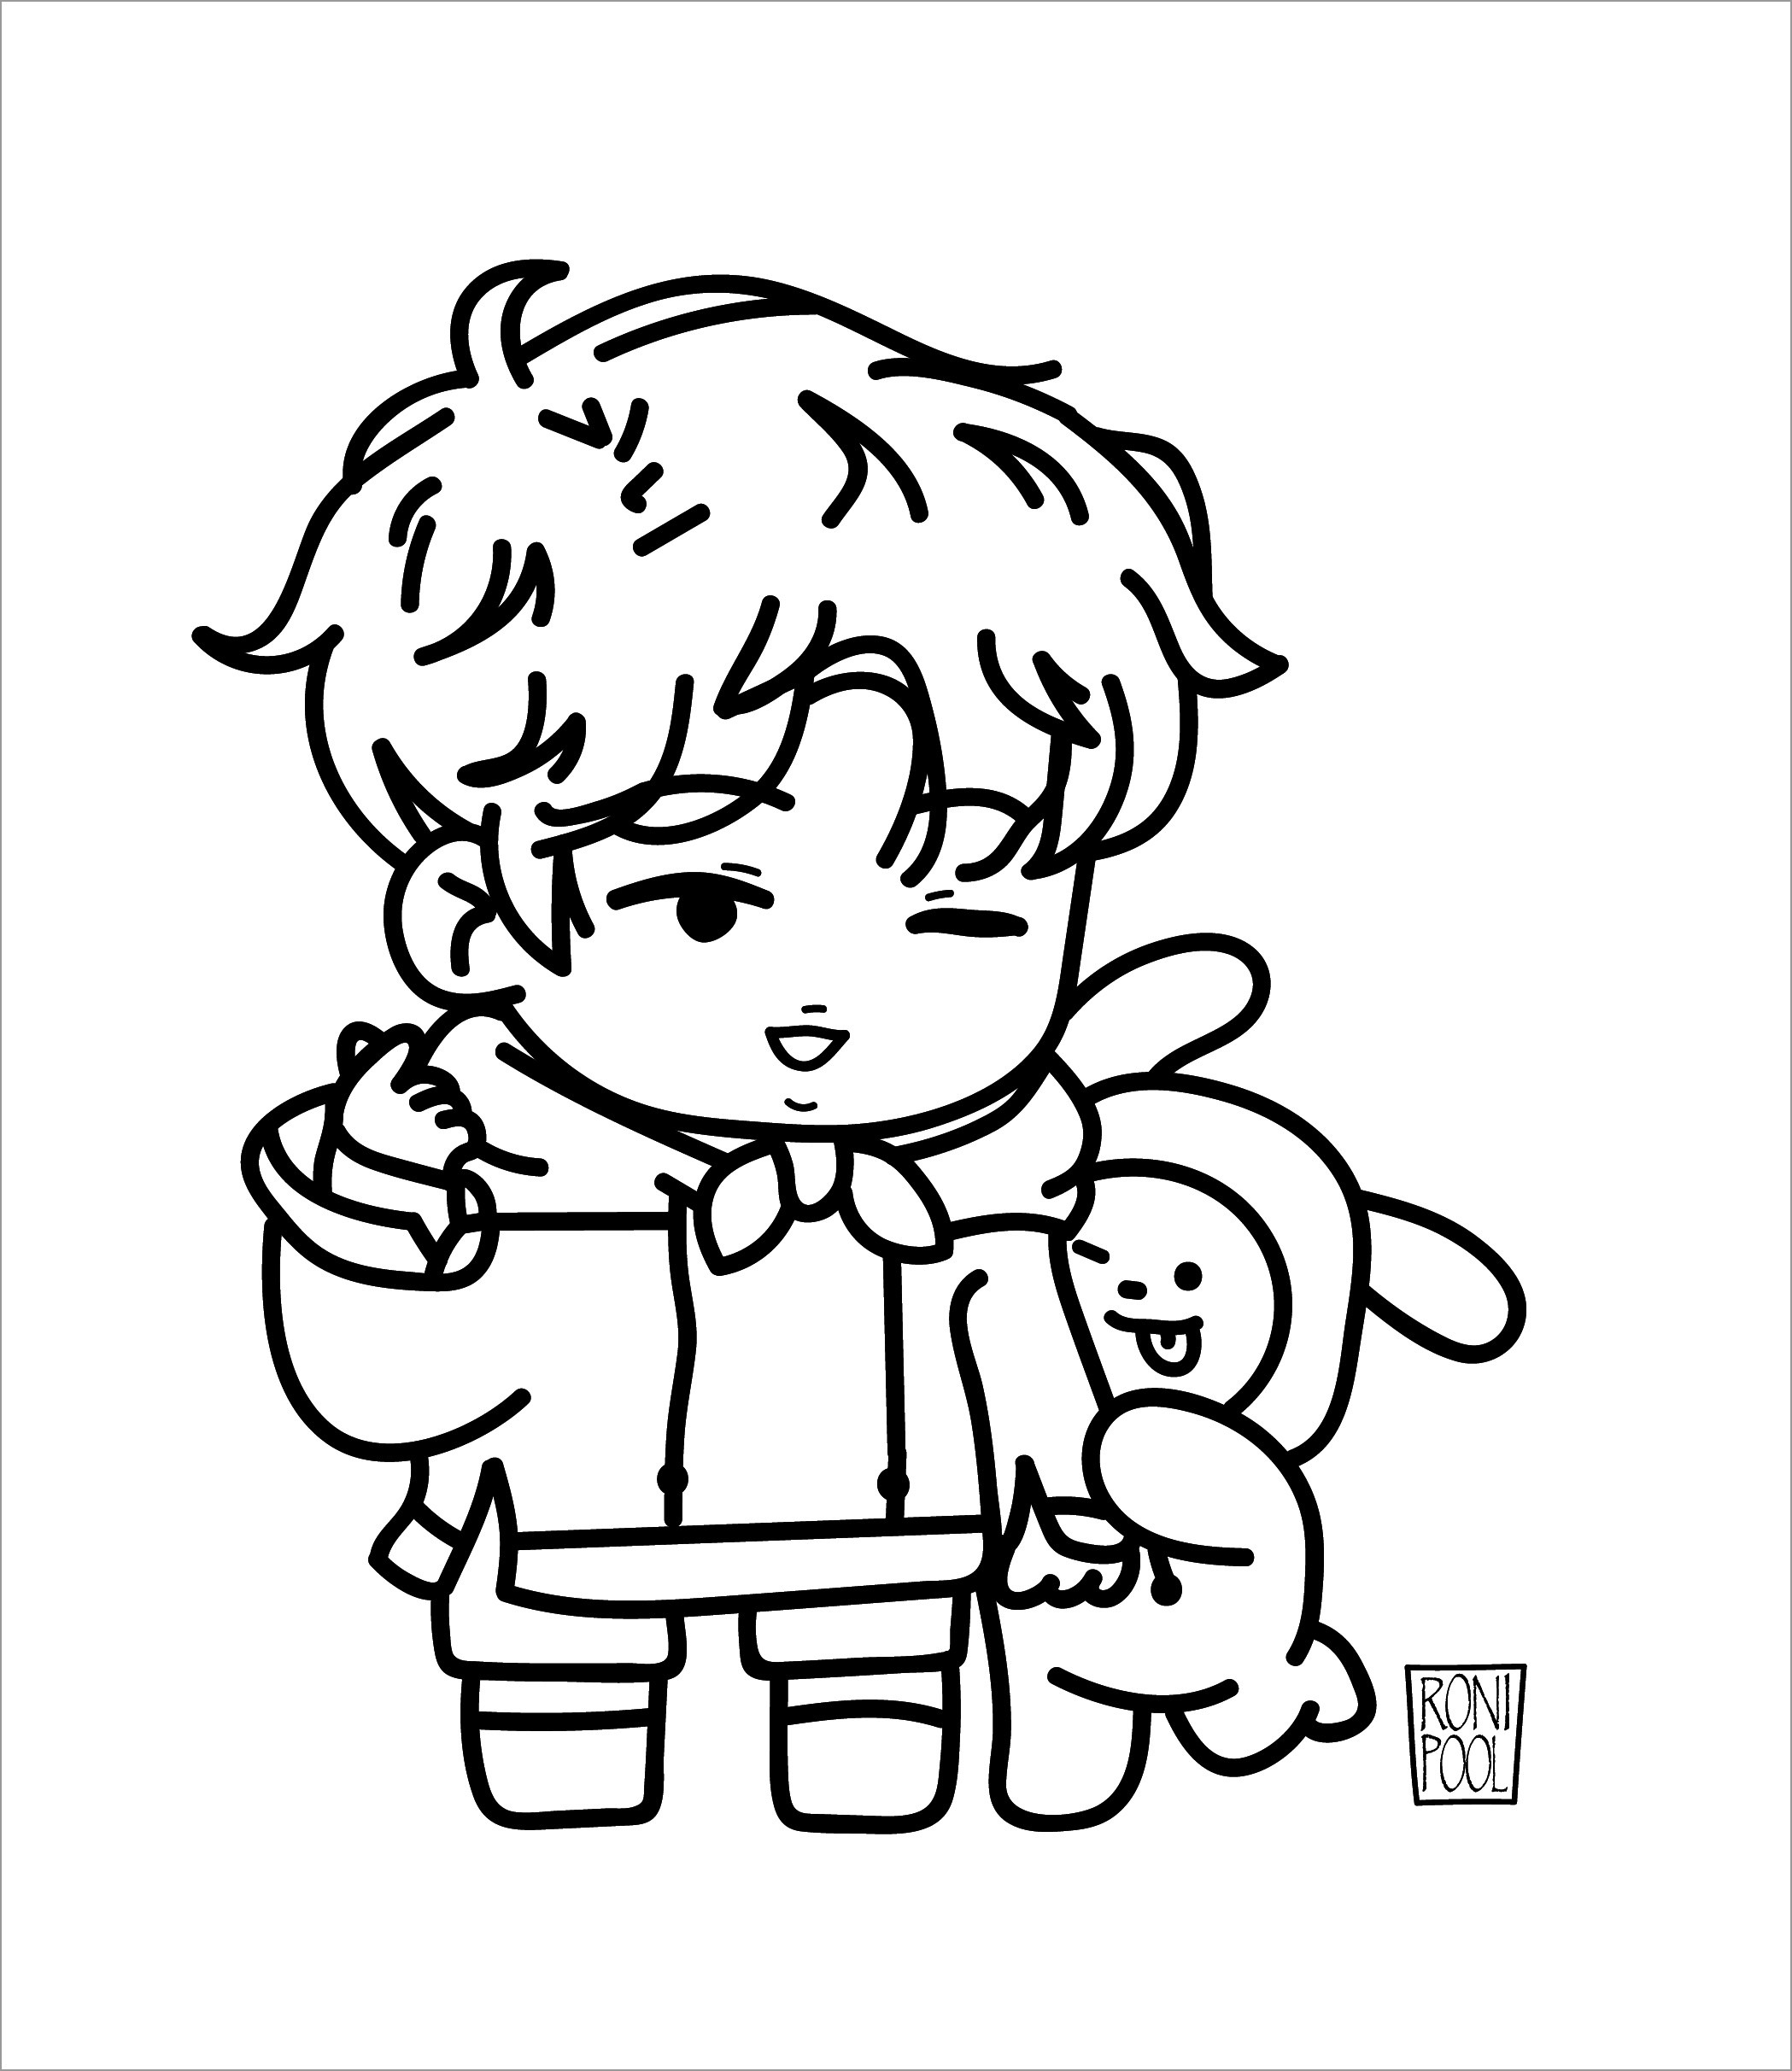 Bts Fanart Bt21 Chimmy and Jimin Chibi Coloring Page